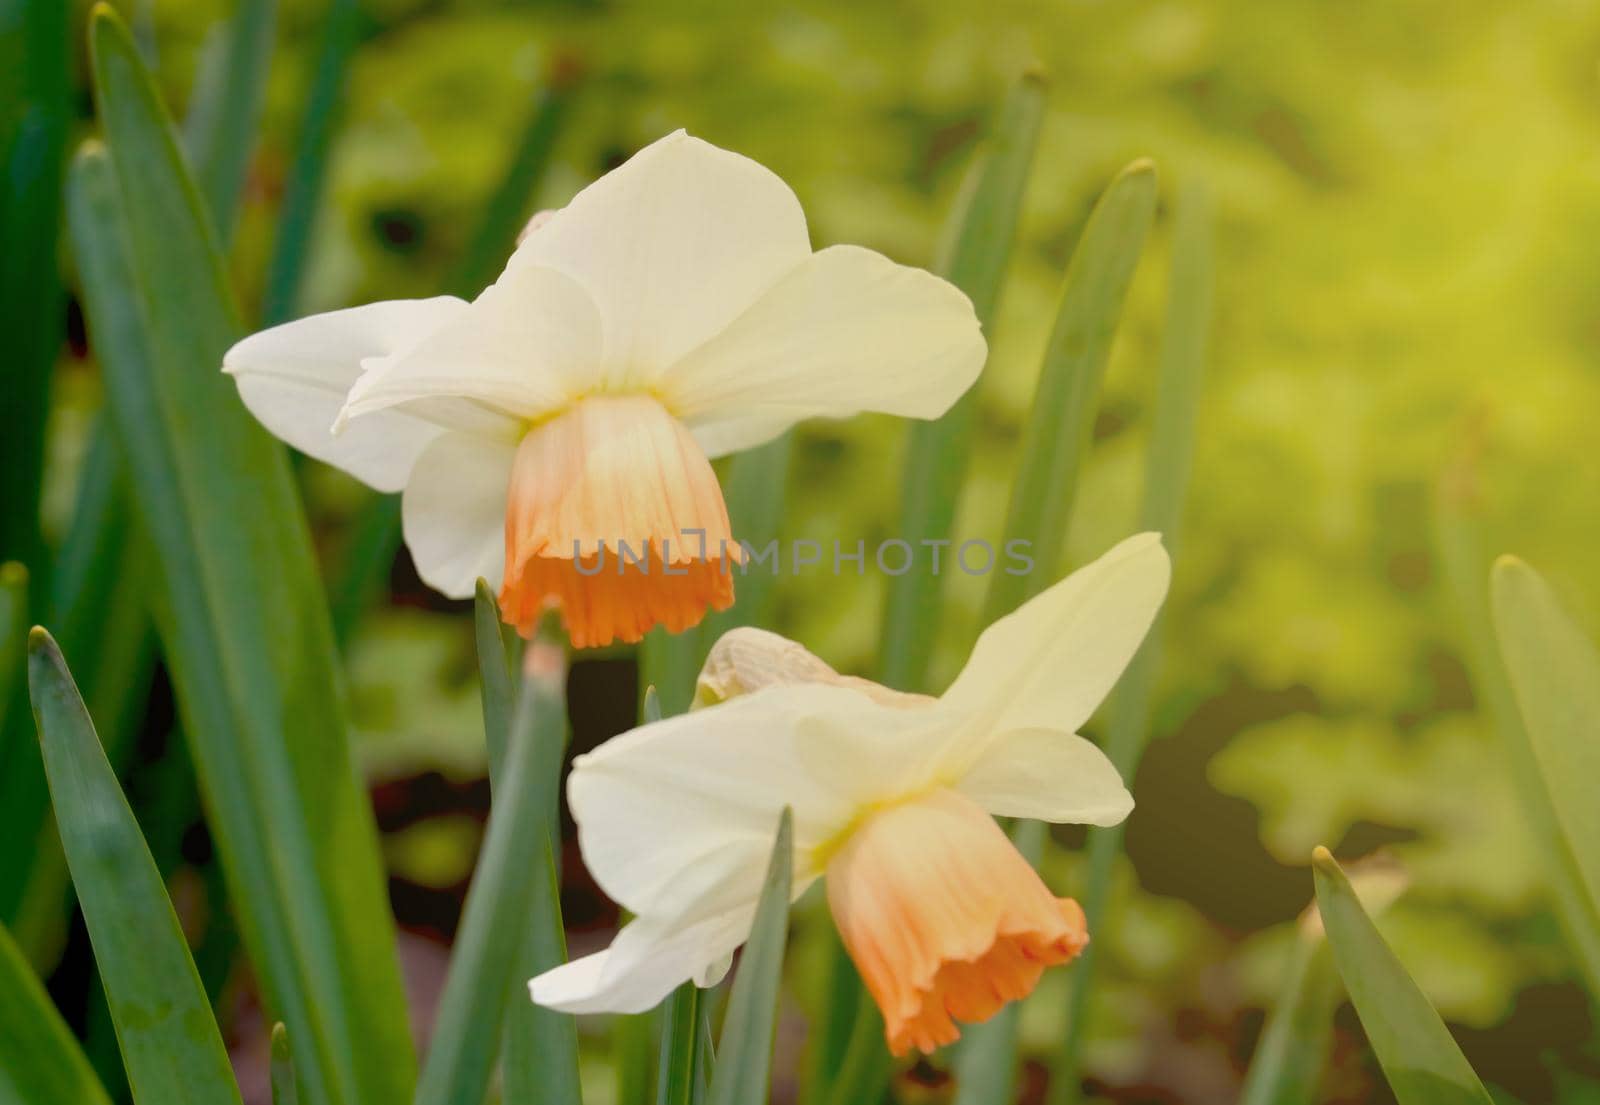 Blooming daffodils in the garden during sunset